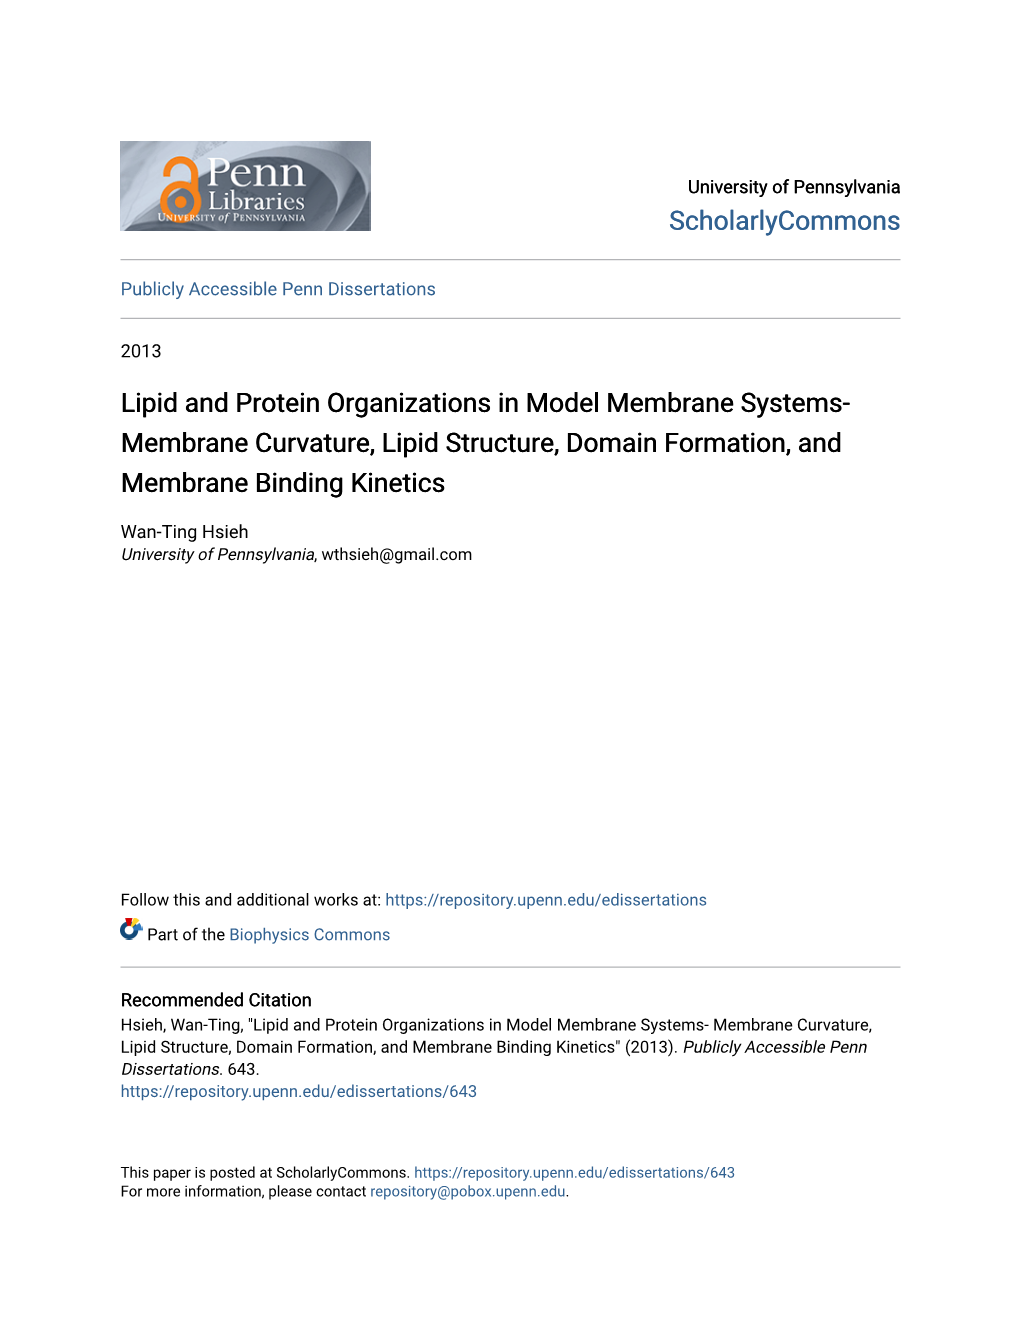 Lipid and Protein Organizations in Model Membrane Systems- Membrane Curvature, Lipid Structure, Domain Formation, and Membrane Binding Kinetics